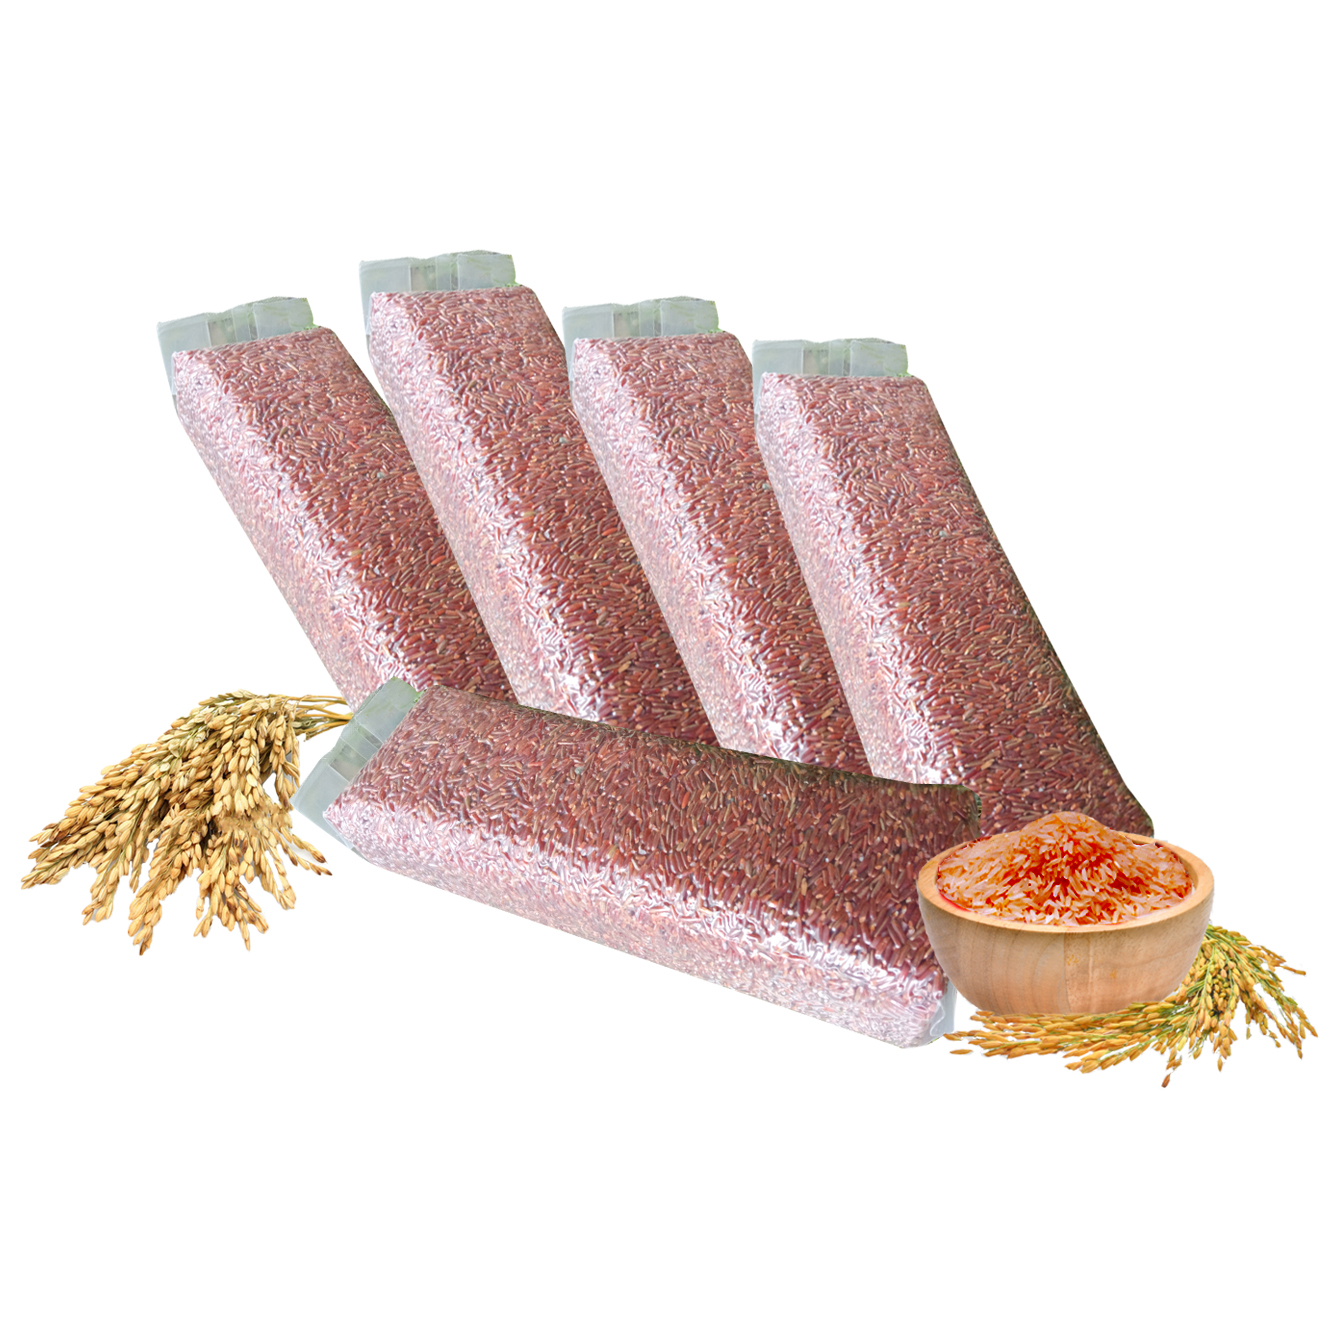 Red Rice (5kg)